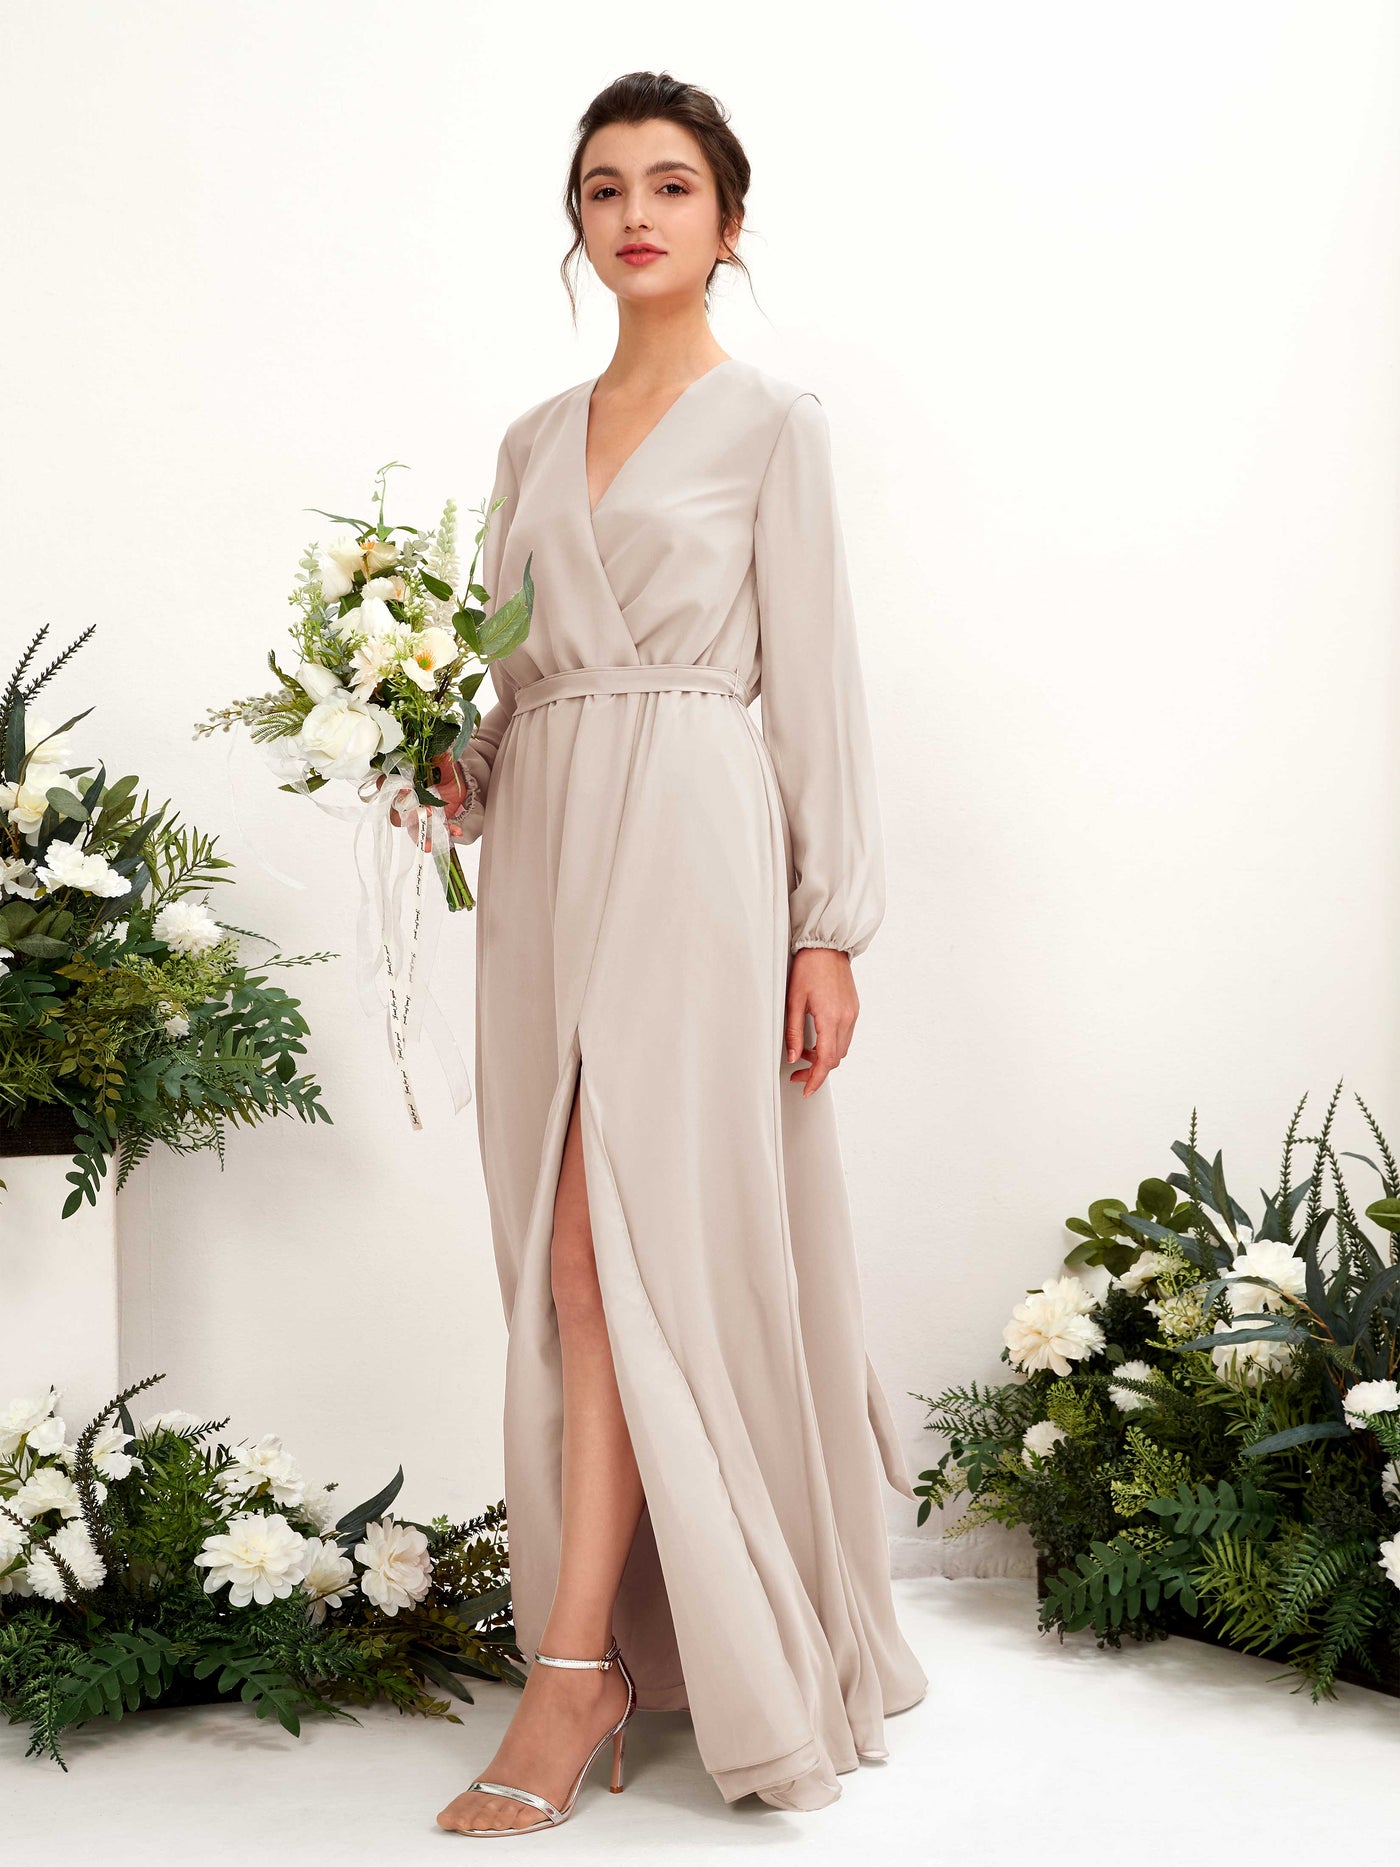 Champagne Bridesmaid Dresses Bridesmaid Dress A-line Chiffon V-neck Full Length Long Sleeves Wedding Party Dress (81223216)#color_champagne